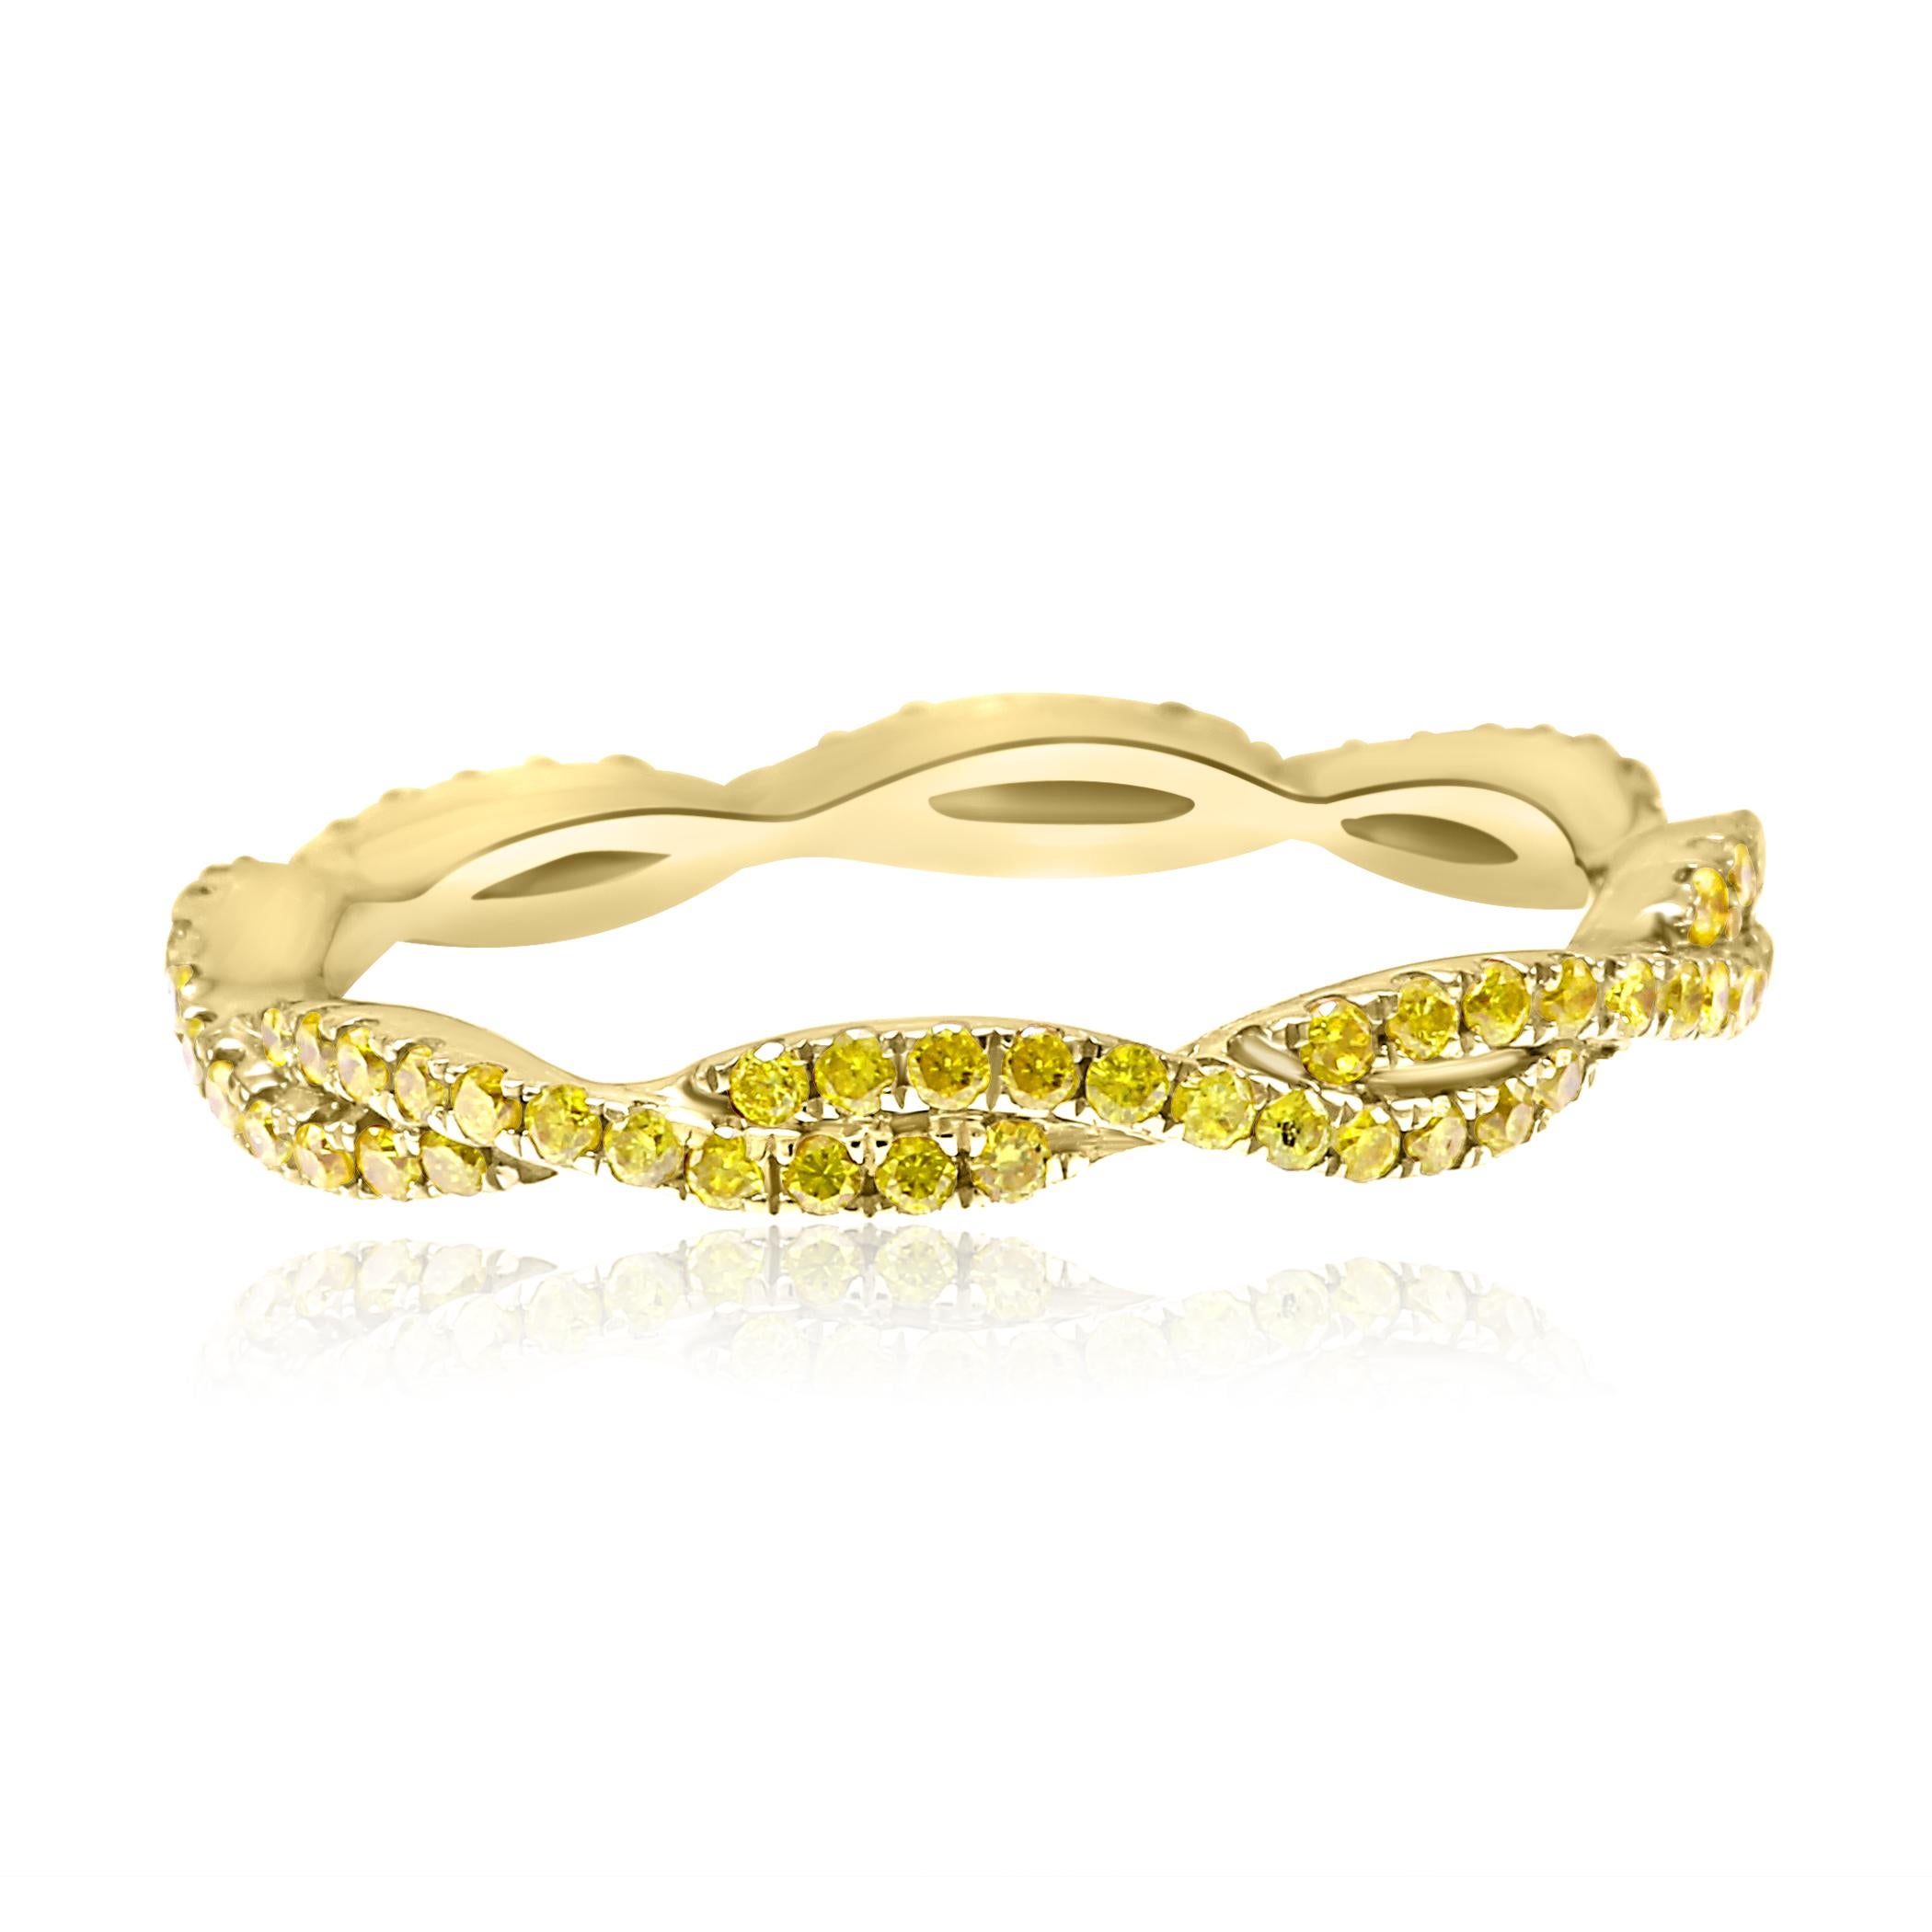 88 Natural Fancy Yellow Diamond Rounds 0.60 Carat in Twist Rope Style 14K Yellow Gold Stackable Band Fashion Ring.

Total Diamond Weight 0.60 Carat

Style available in different price ranges and with different center stones and gold colors, can be